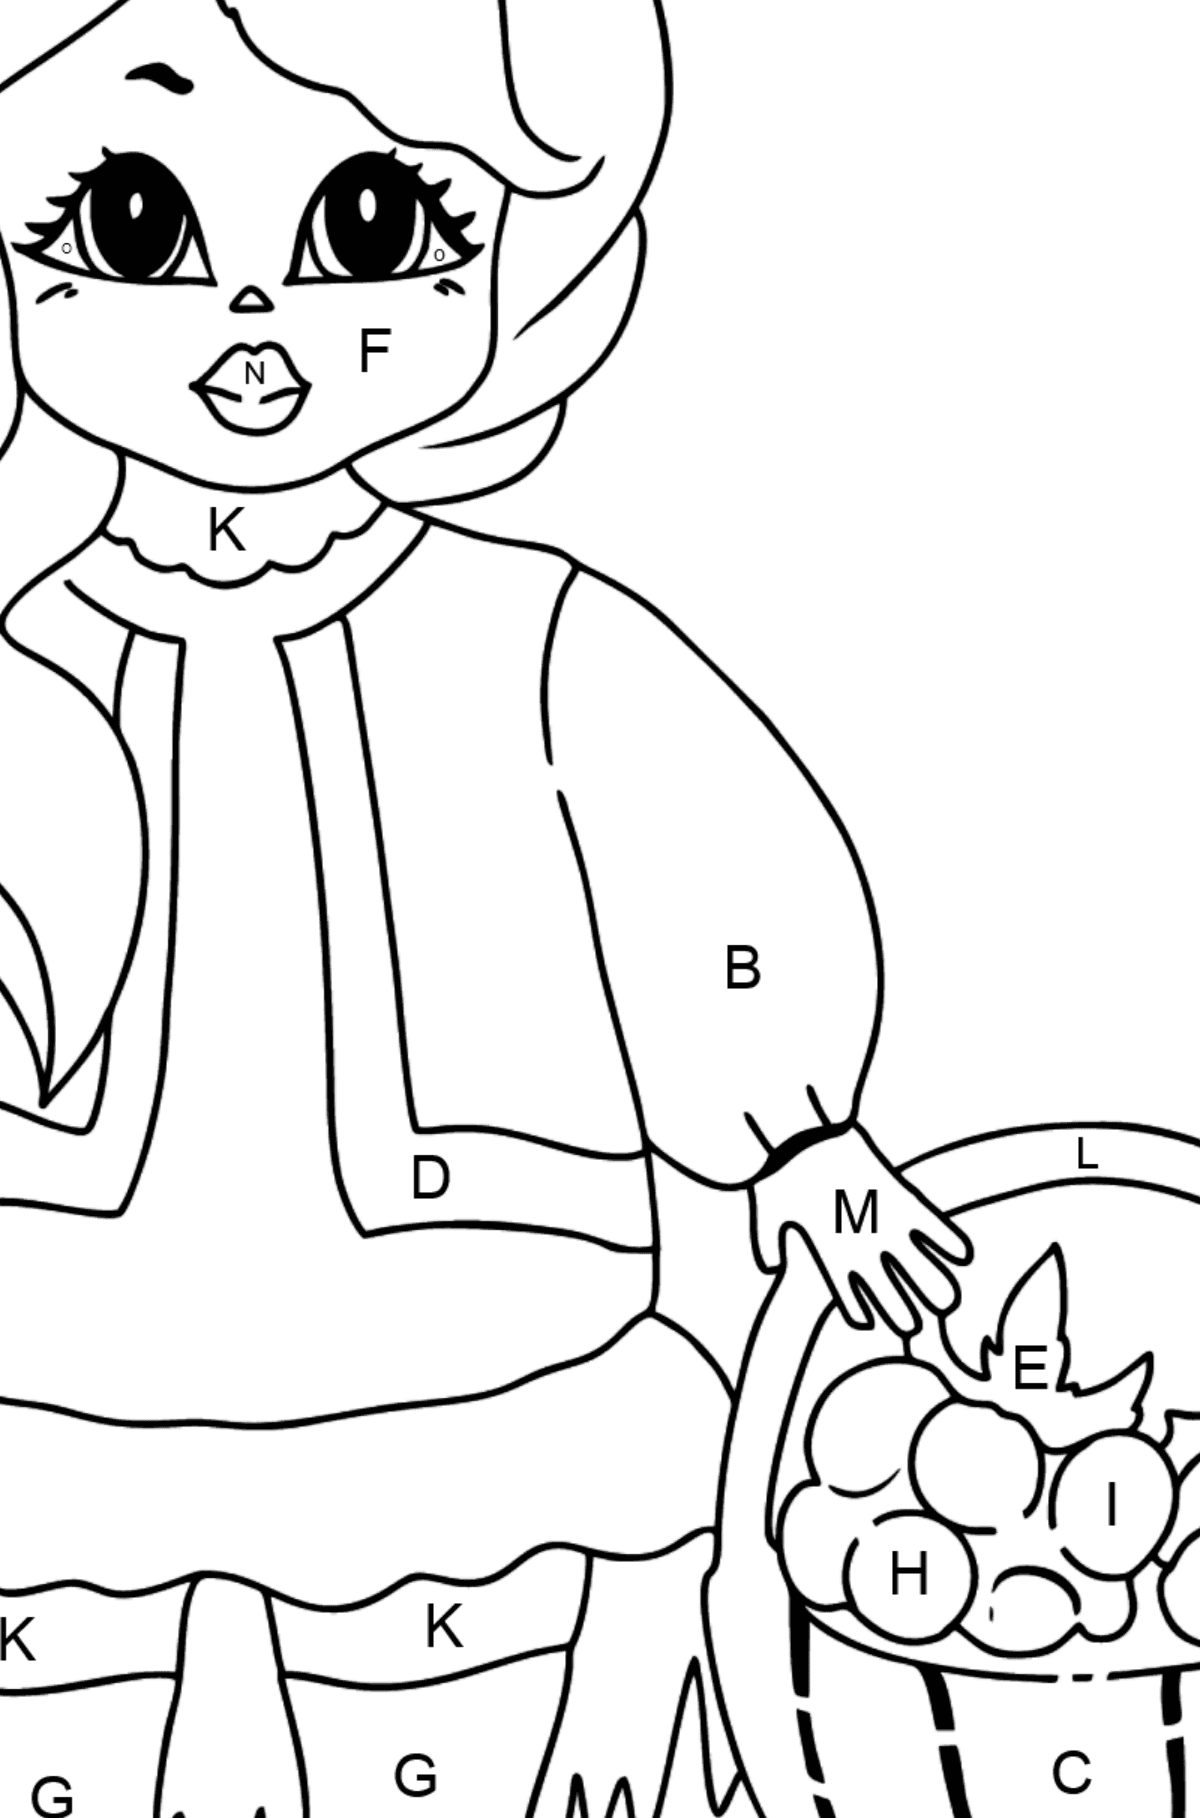 Coloring Page - A Princess with a Basket - Coloring by Letters for Kids